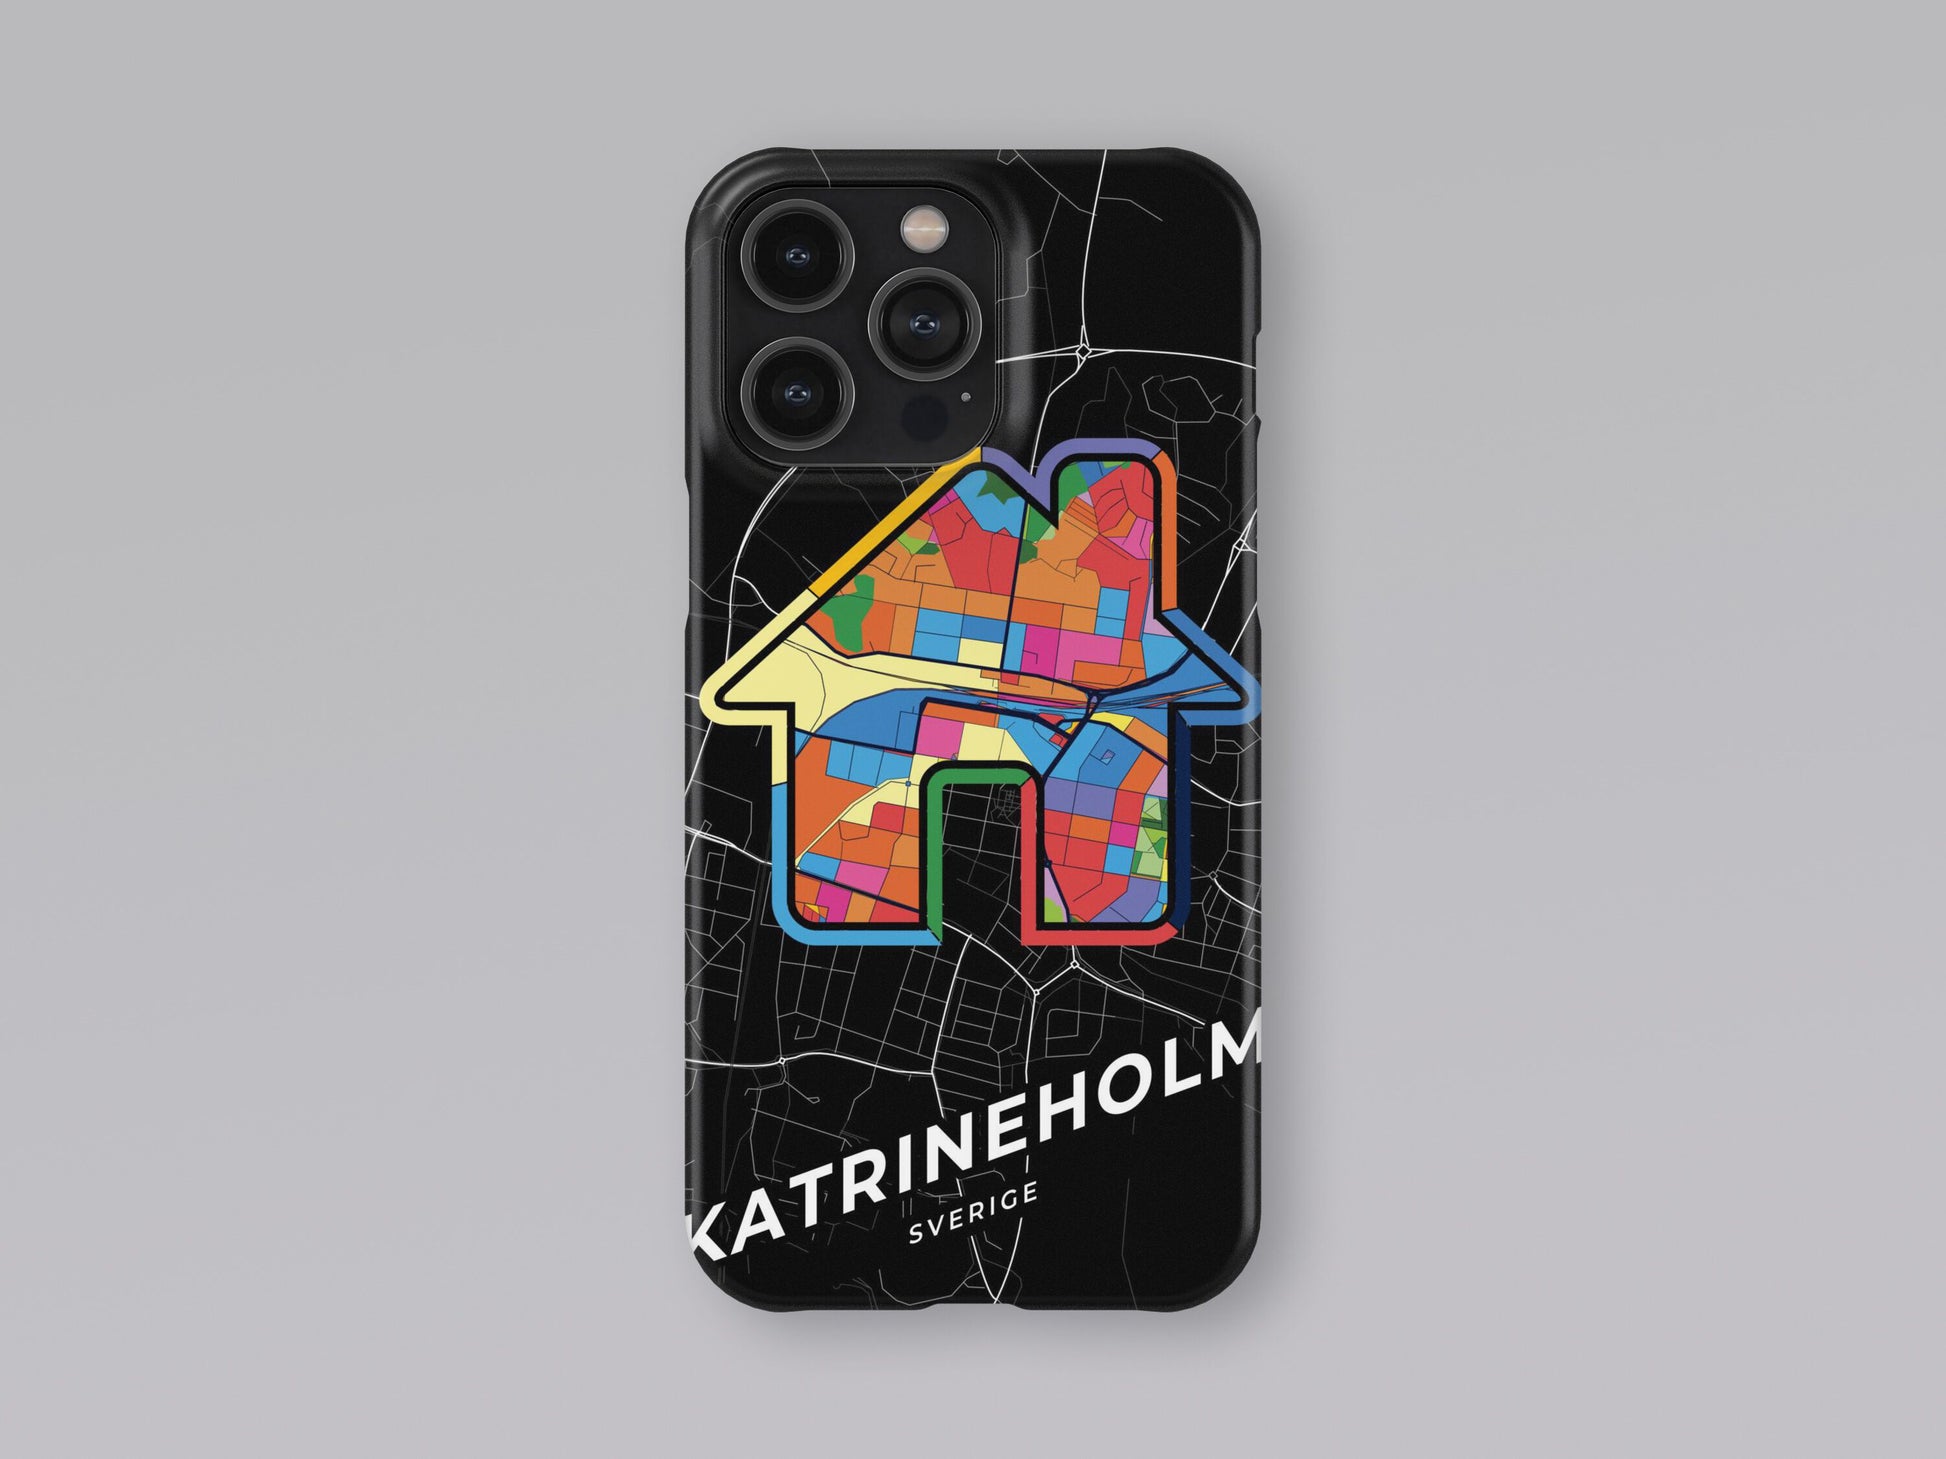 Katrineholm Sweden slim phone case with colorful icon. Birthday, wedding or housewarming gift. Couple match cases. 3